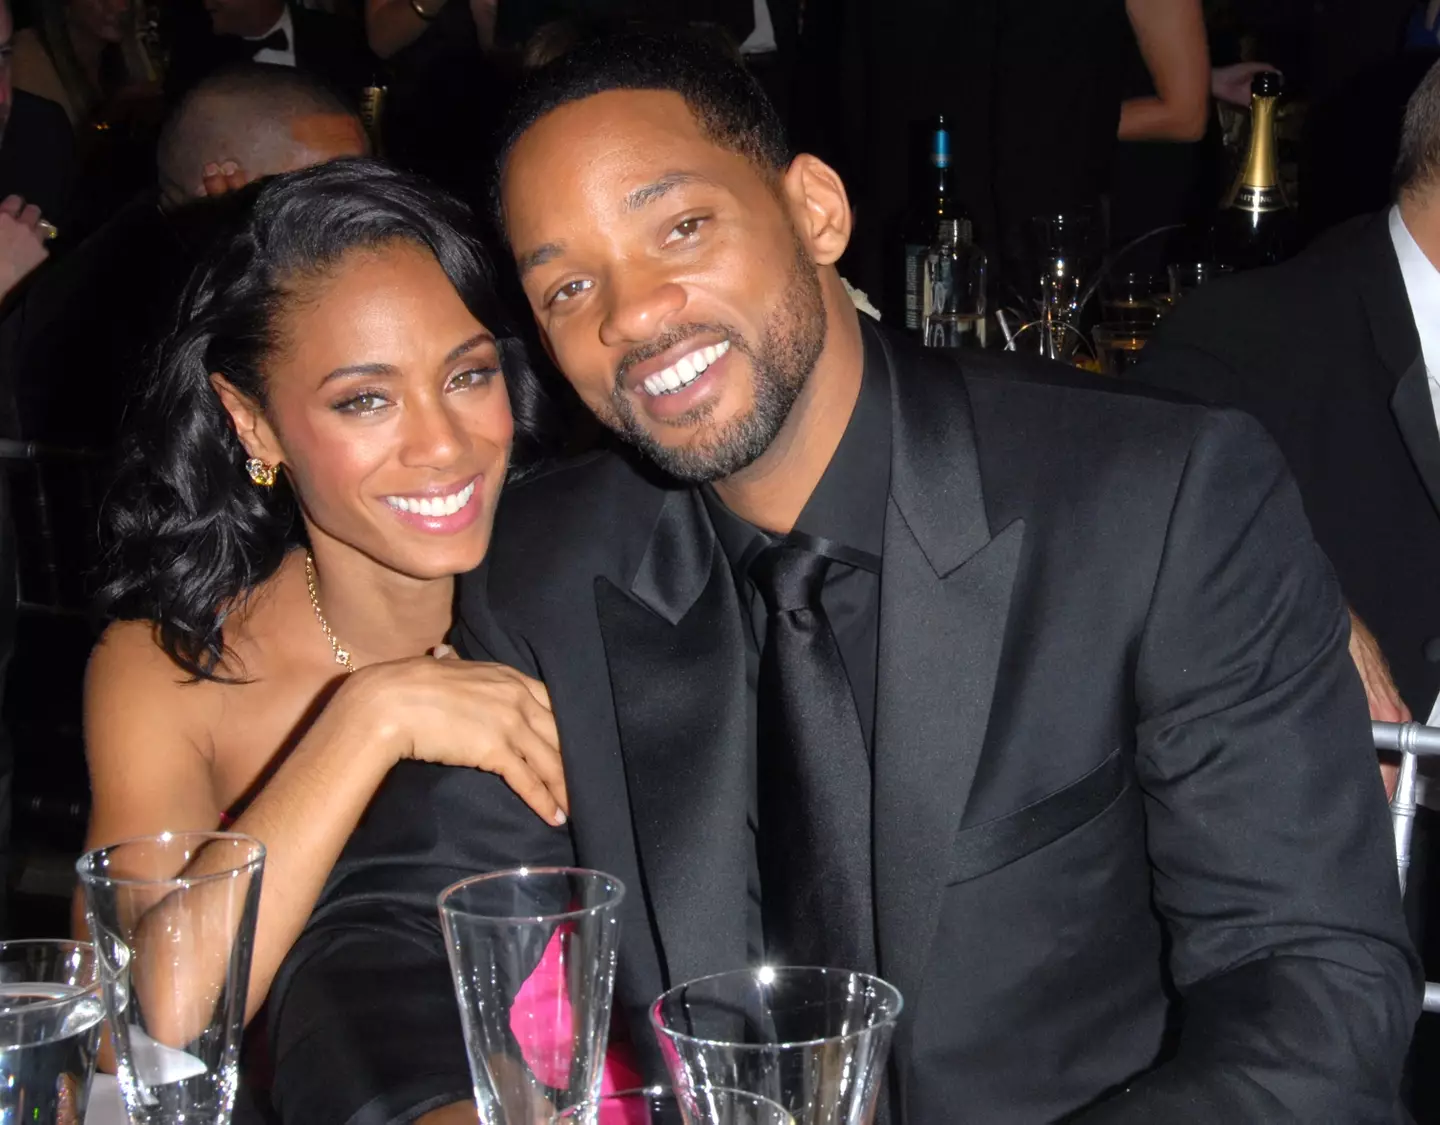 Jada and Will got married in 1997.